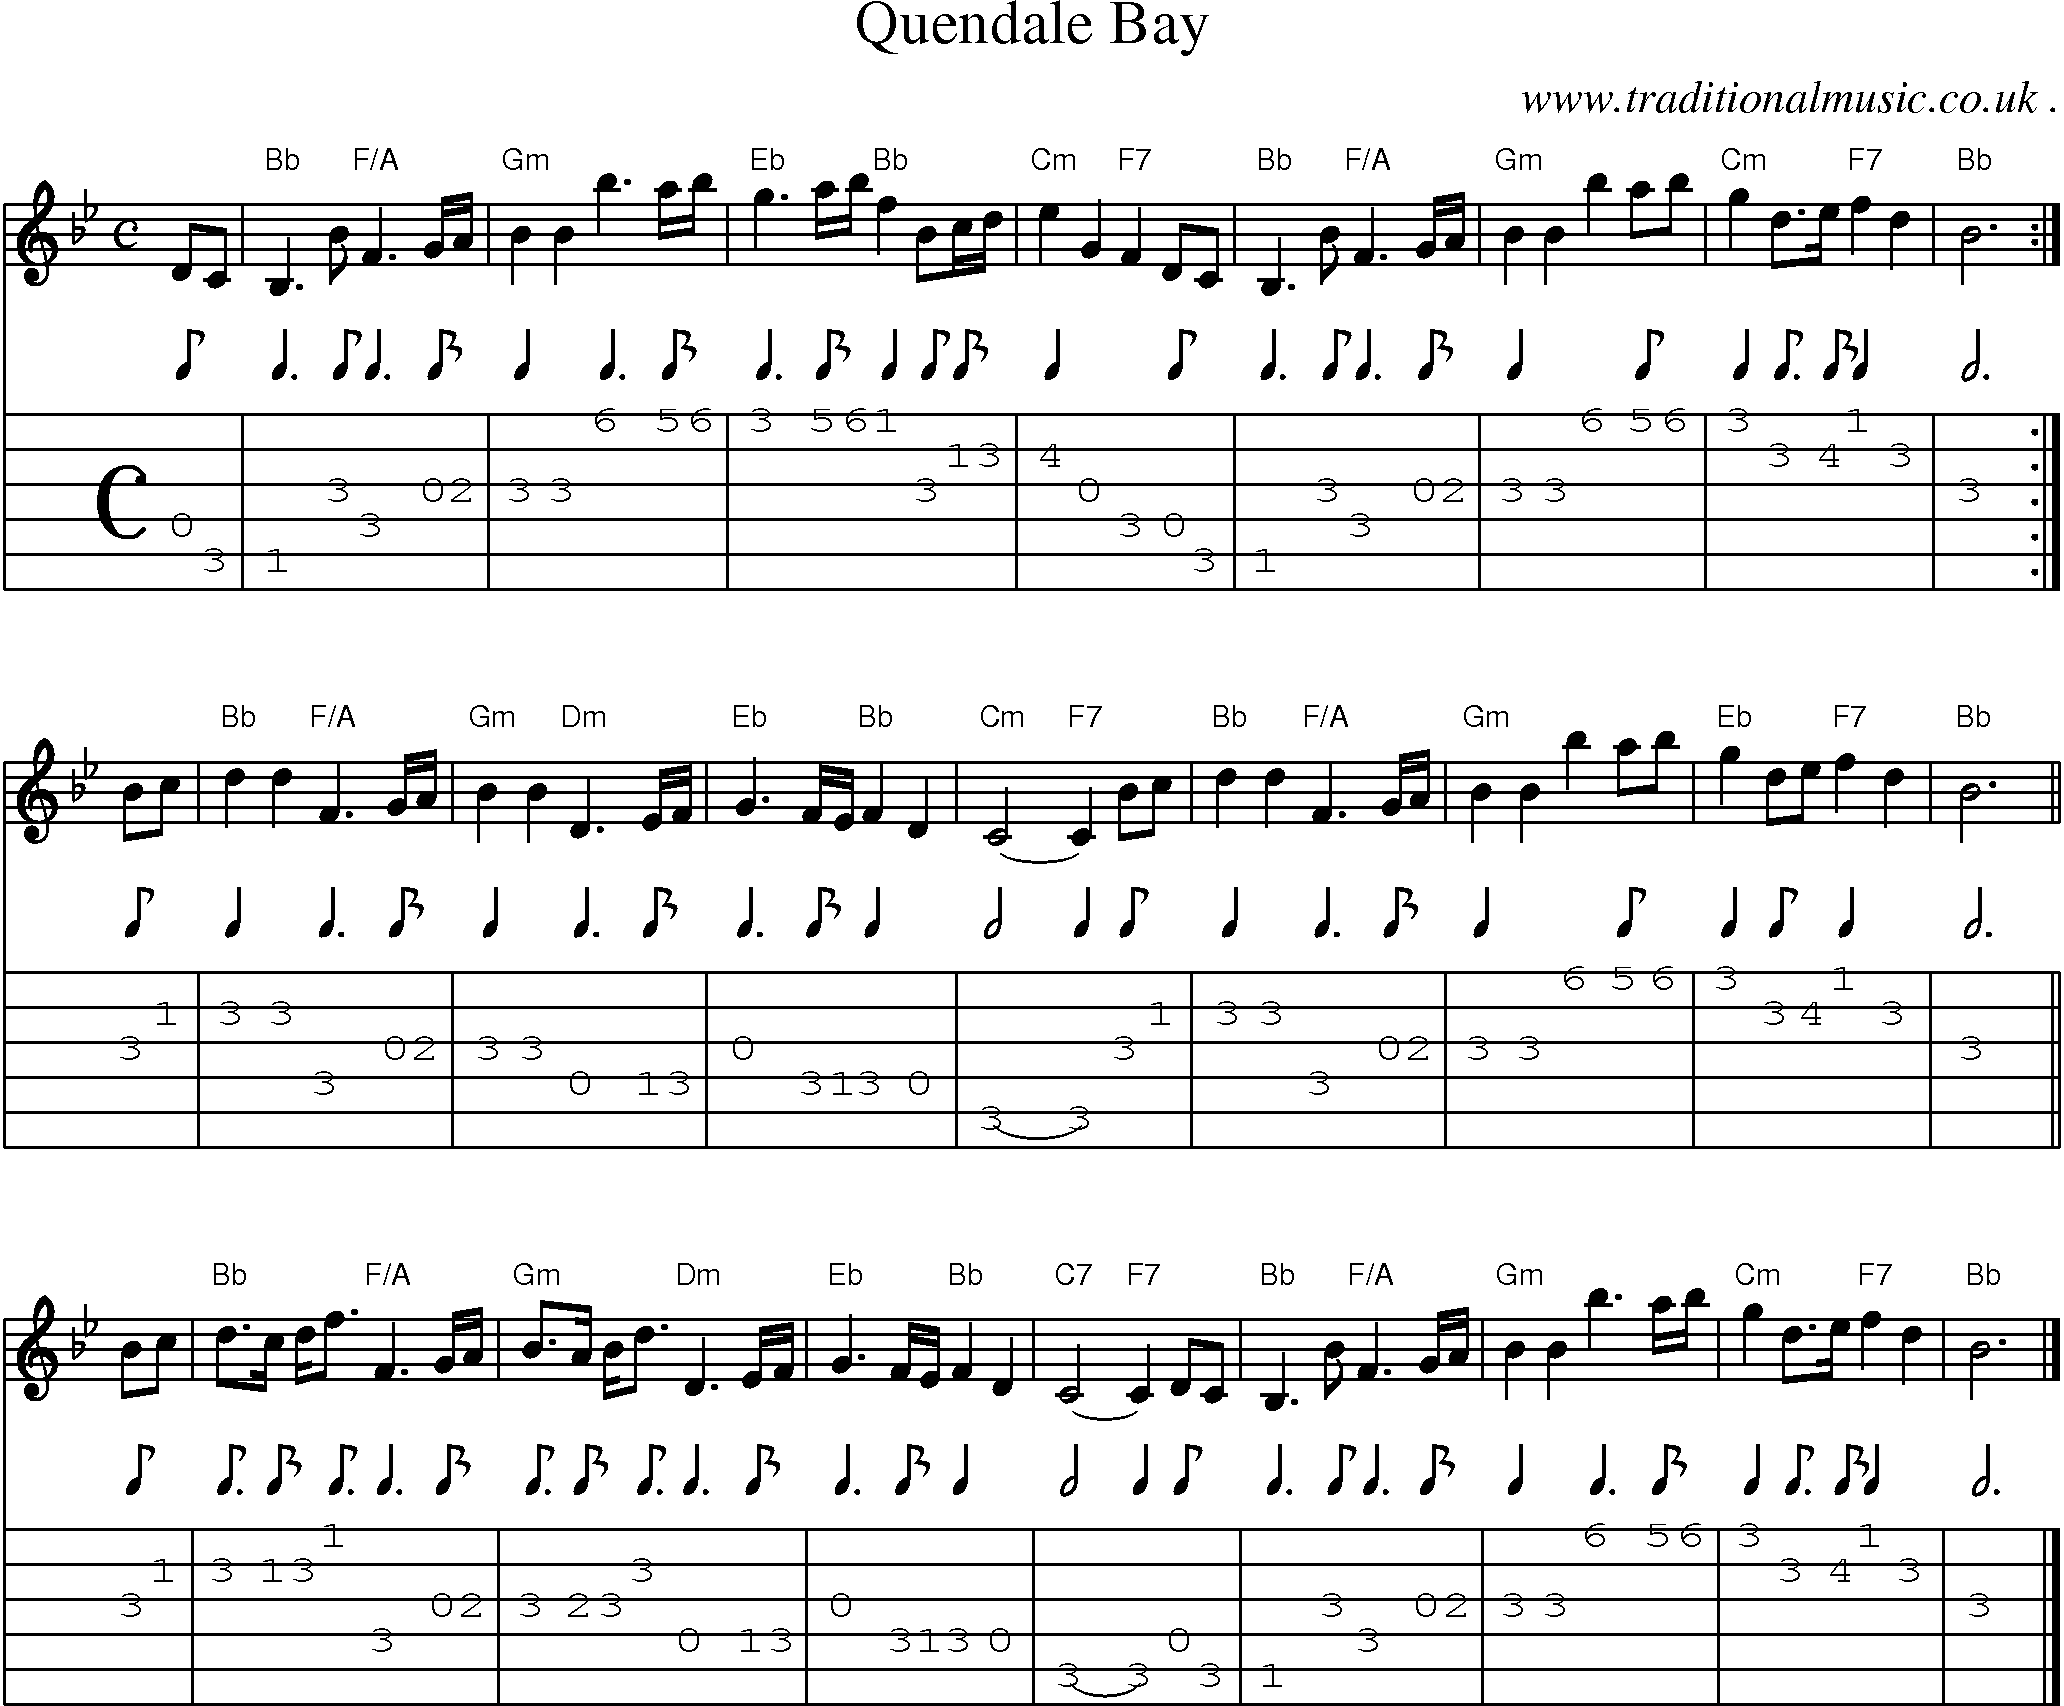 Sheet-music  score, Chords and Guitar Tabs for Quendale Bay